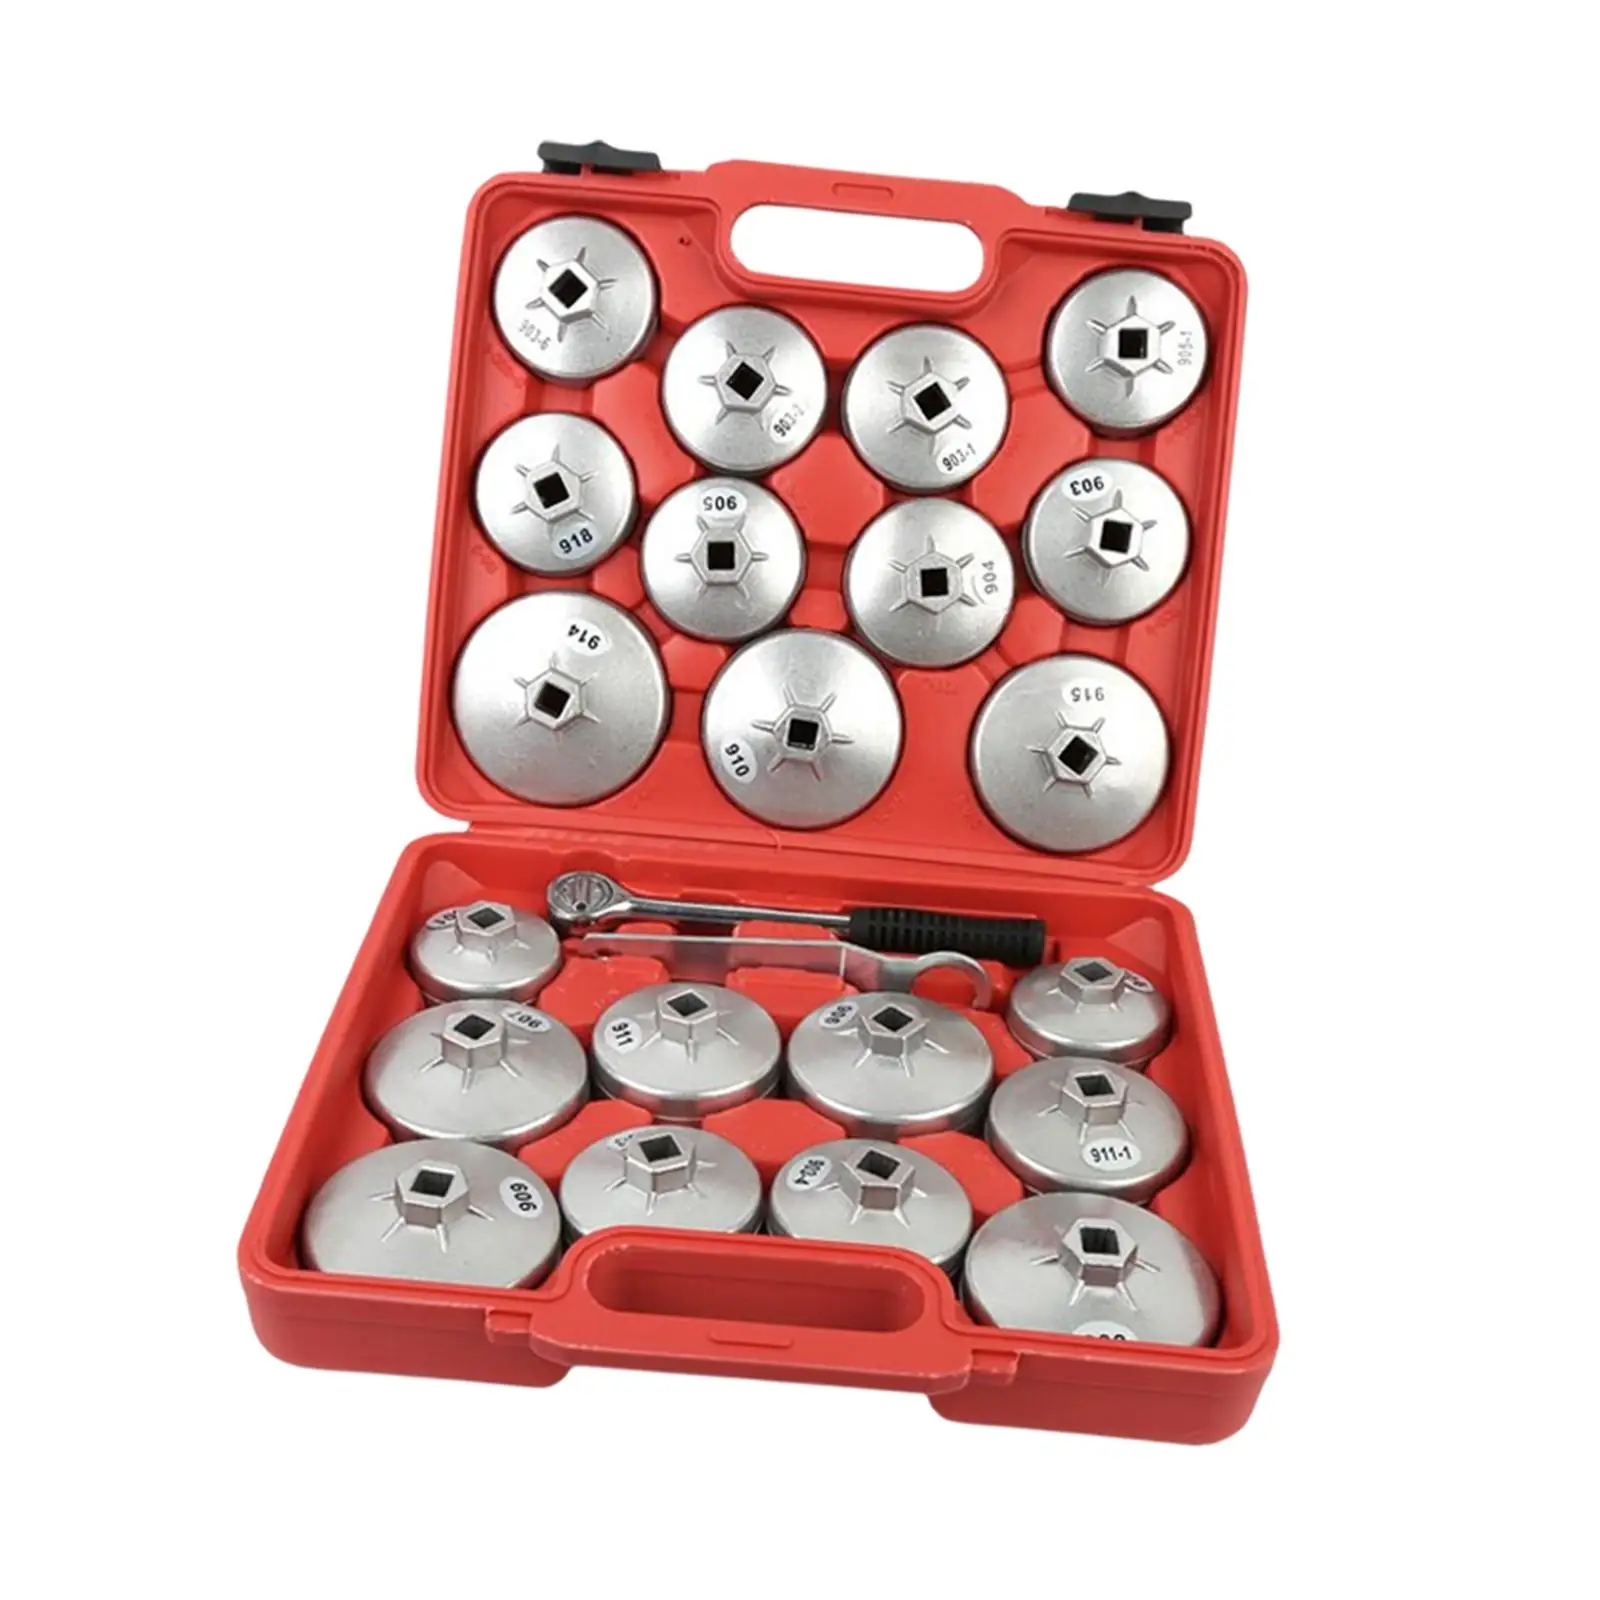 23Pcs Oil Filter Wrench Cup Set with Storage Case Silver Wrench Remover Fit for Audi Auto 901-915 Aluminium Alloy Car Supplies